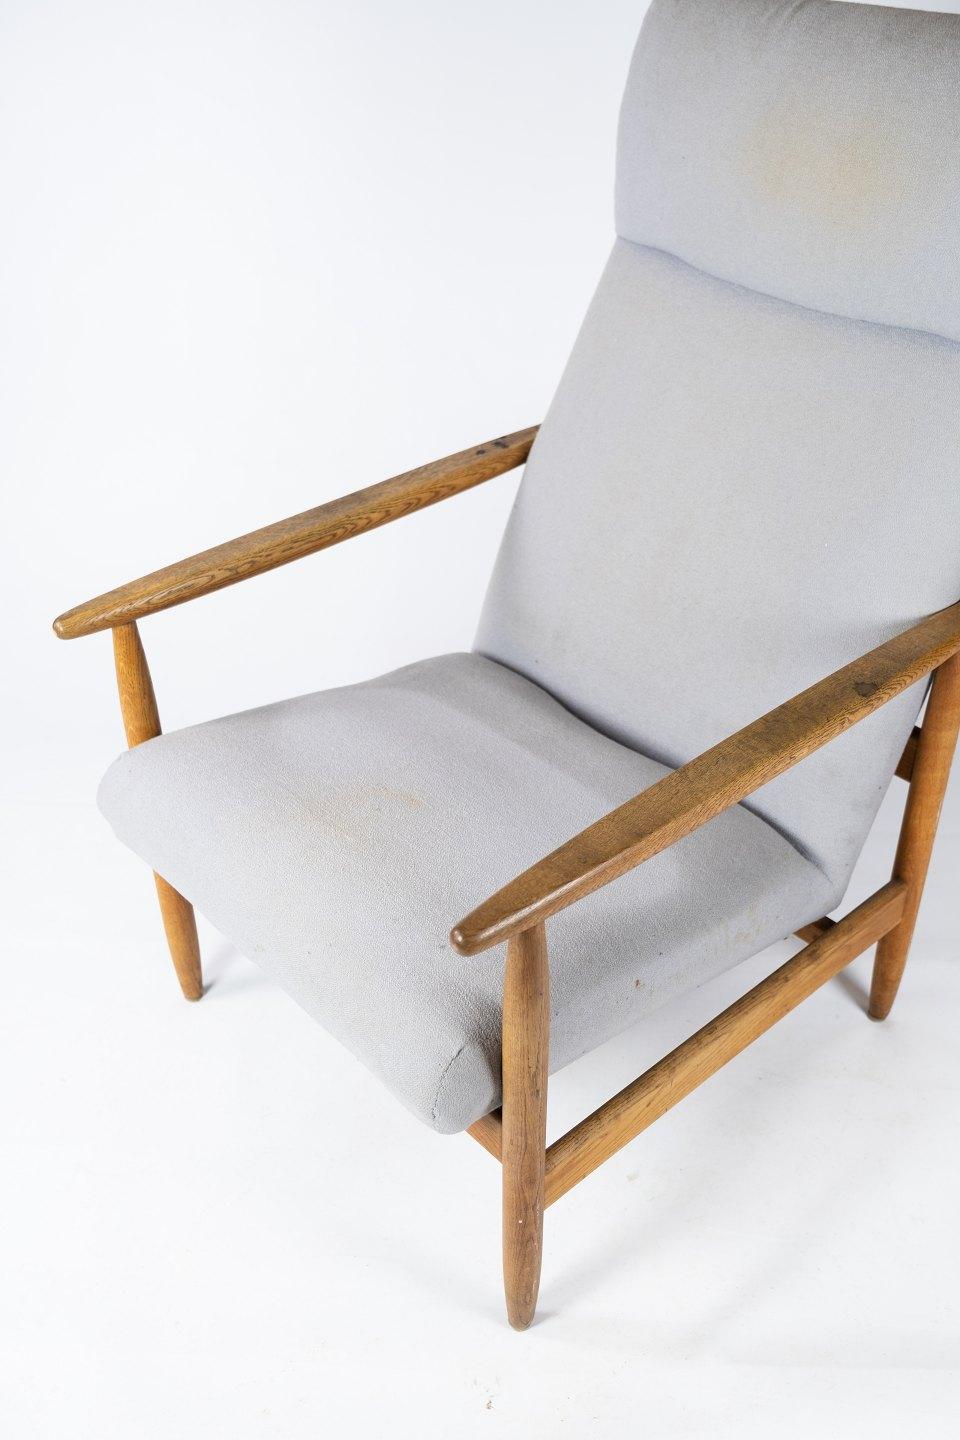 Easy chair, model J65 in light wood and upholstered with grey wool fabric designed by Ejvind A Johansson for FDB. The chair is manufactured by FDB in the 1960s.